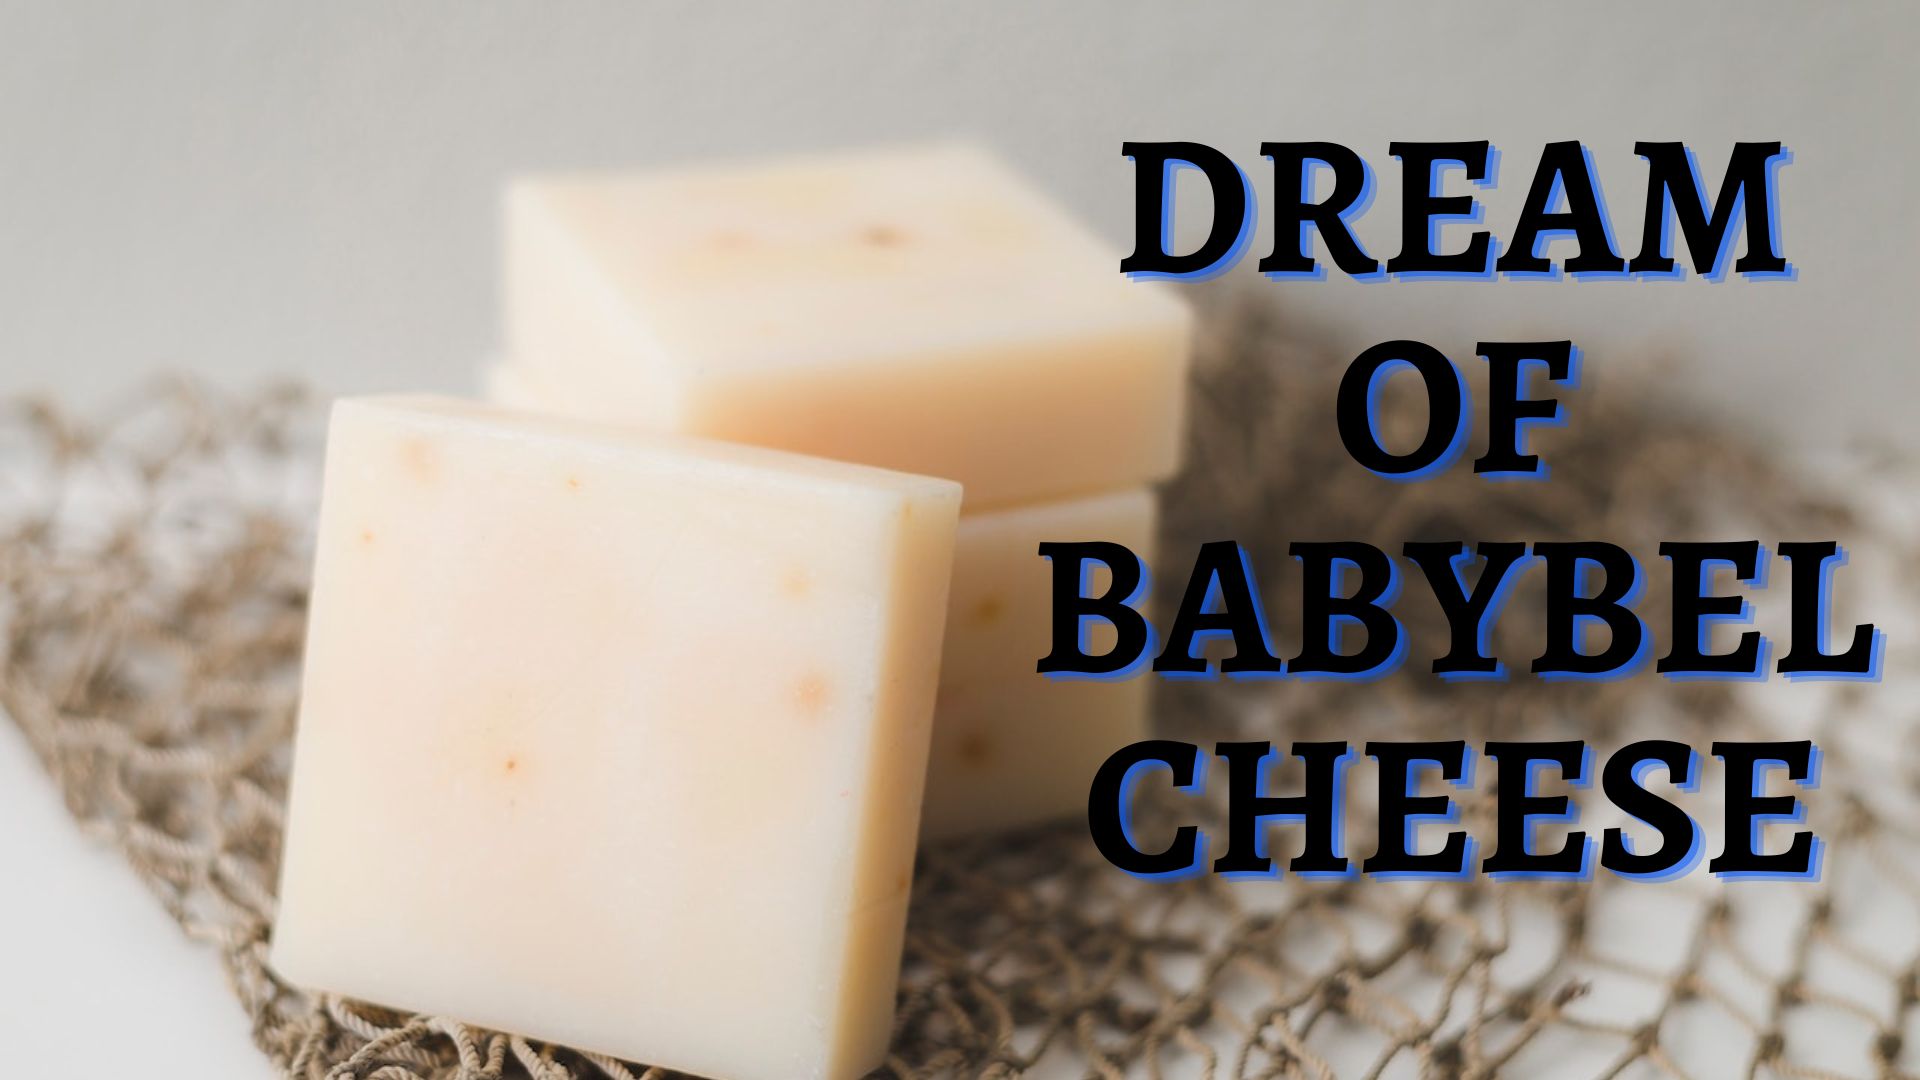 Dream Of Babybel Cheese - Desire For Something Pleasant And Unforgettable